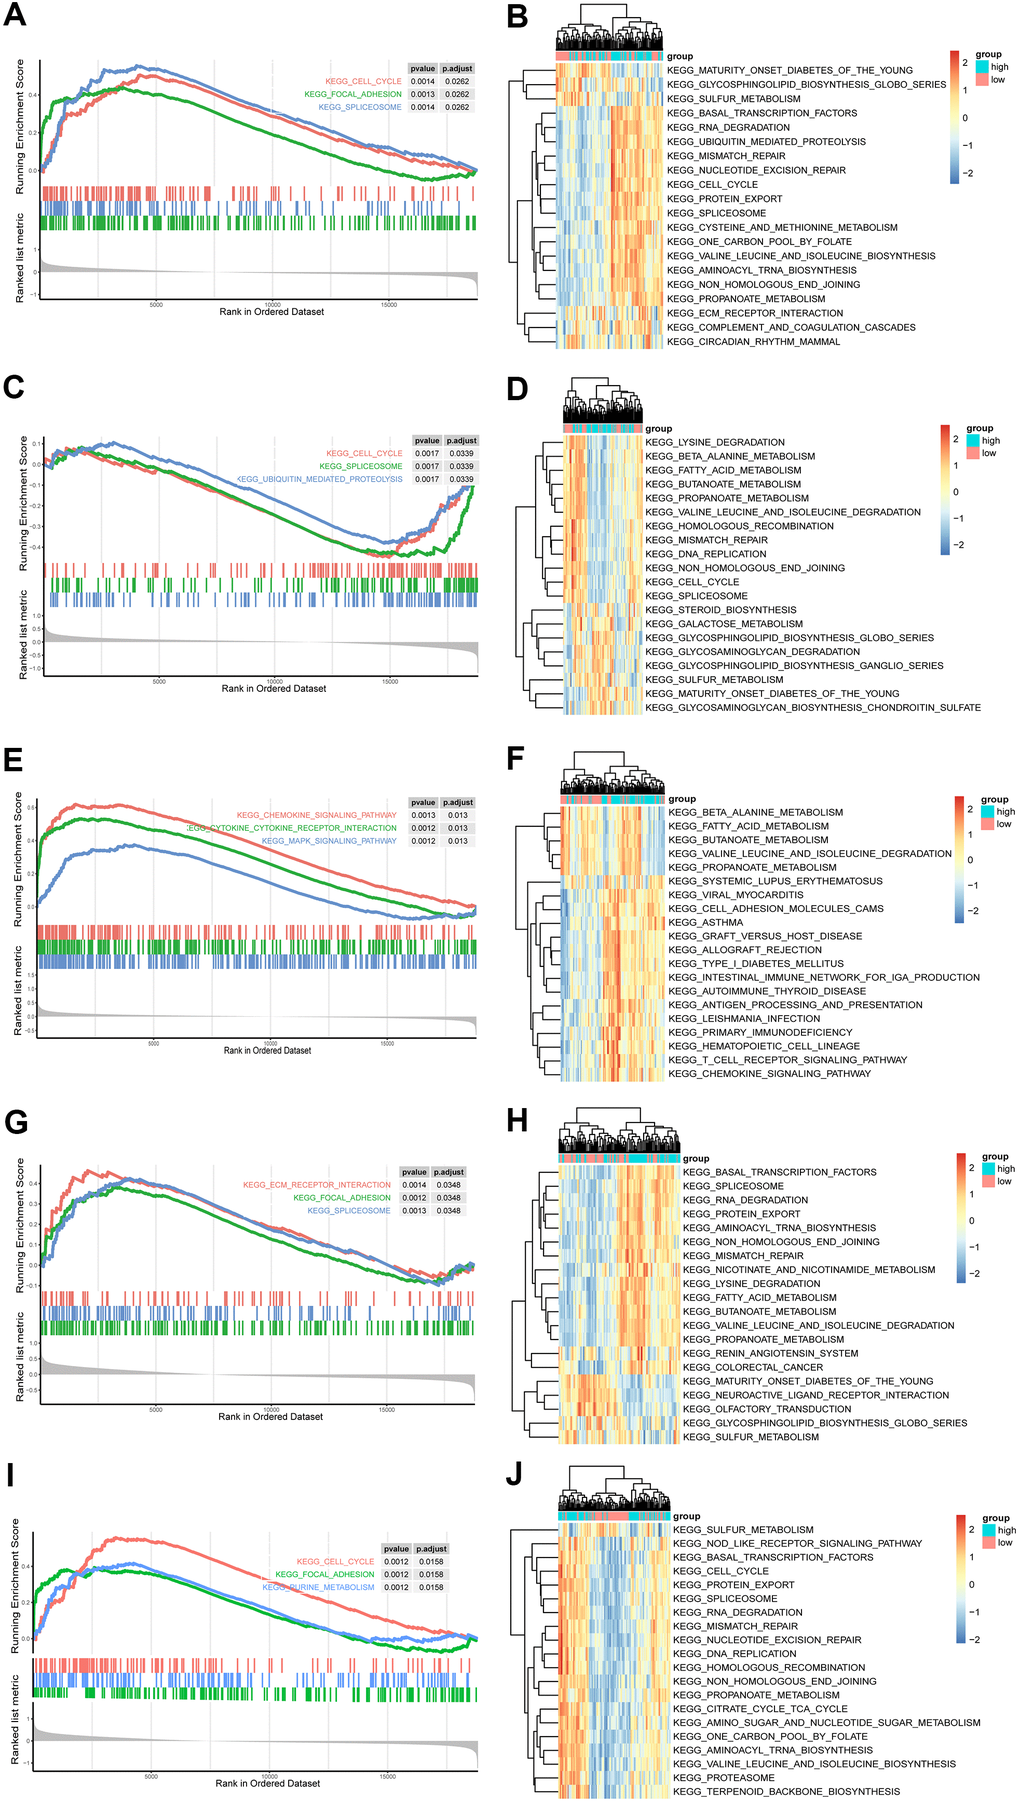 GSEA and GSVA of hub genes in the PAH. (A, C, E, G, I) Top 3 KEGG pathways in the high-expression group of single hub genes. (A) ANGPT2; (C) CSF3R; (E) CXCL9; (G) NT5E; (I) FGF7. (B, D, F, H, J) GSVA-derived clustering heatmaps of top 20 differentially expressed pathways for each hub gene. (B) ANGPT2; (D) CSF3R; (F) CXCL9; (H) NT5E; (J) FGF7.